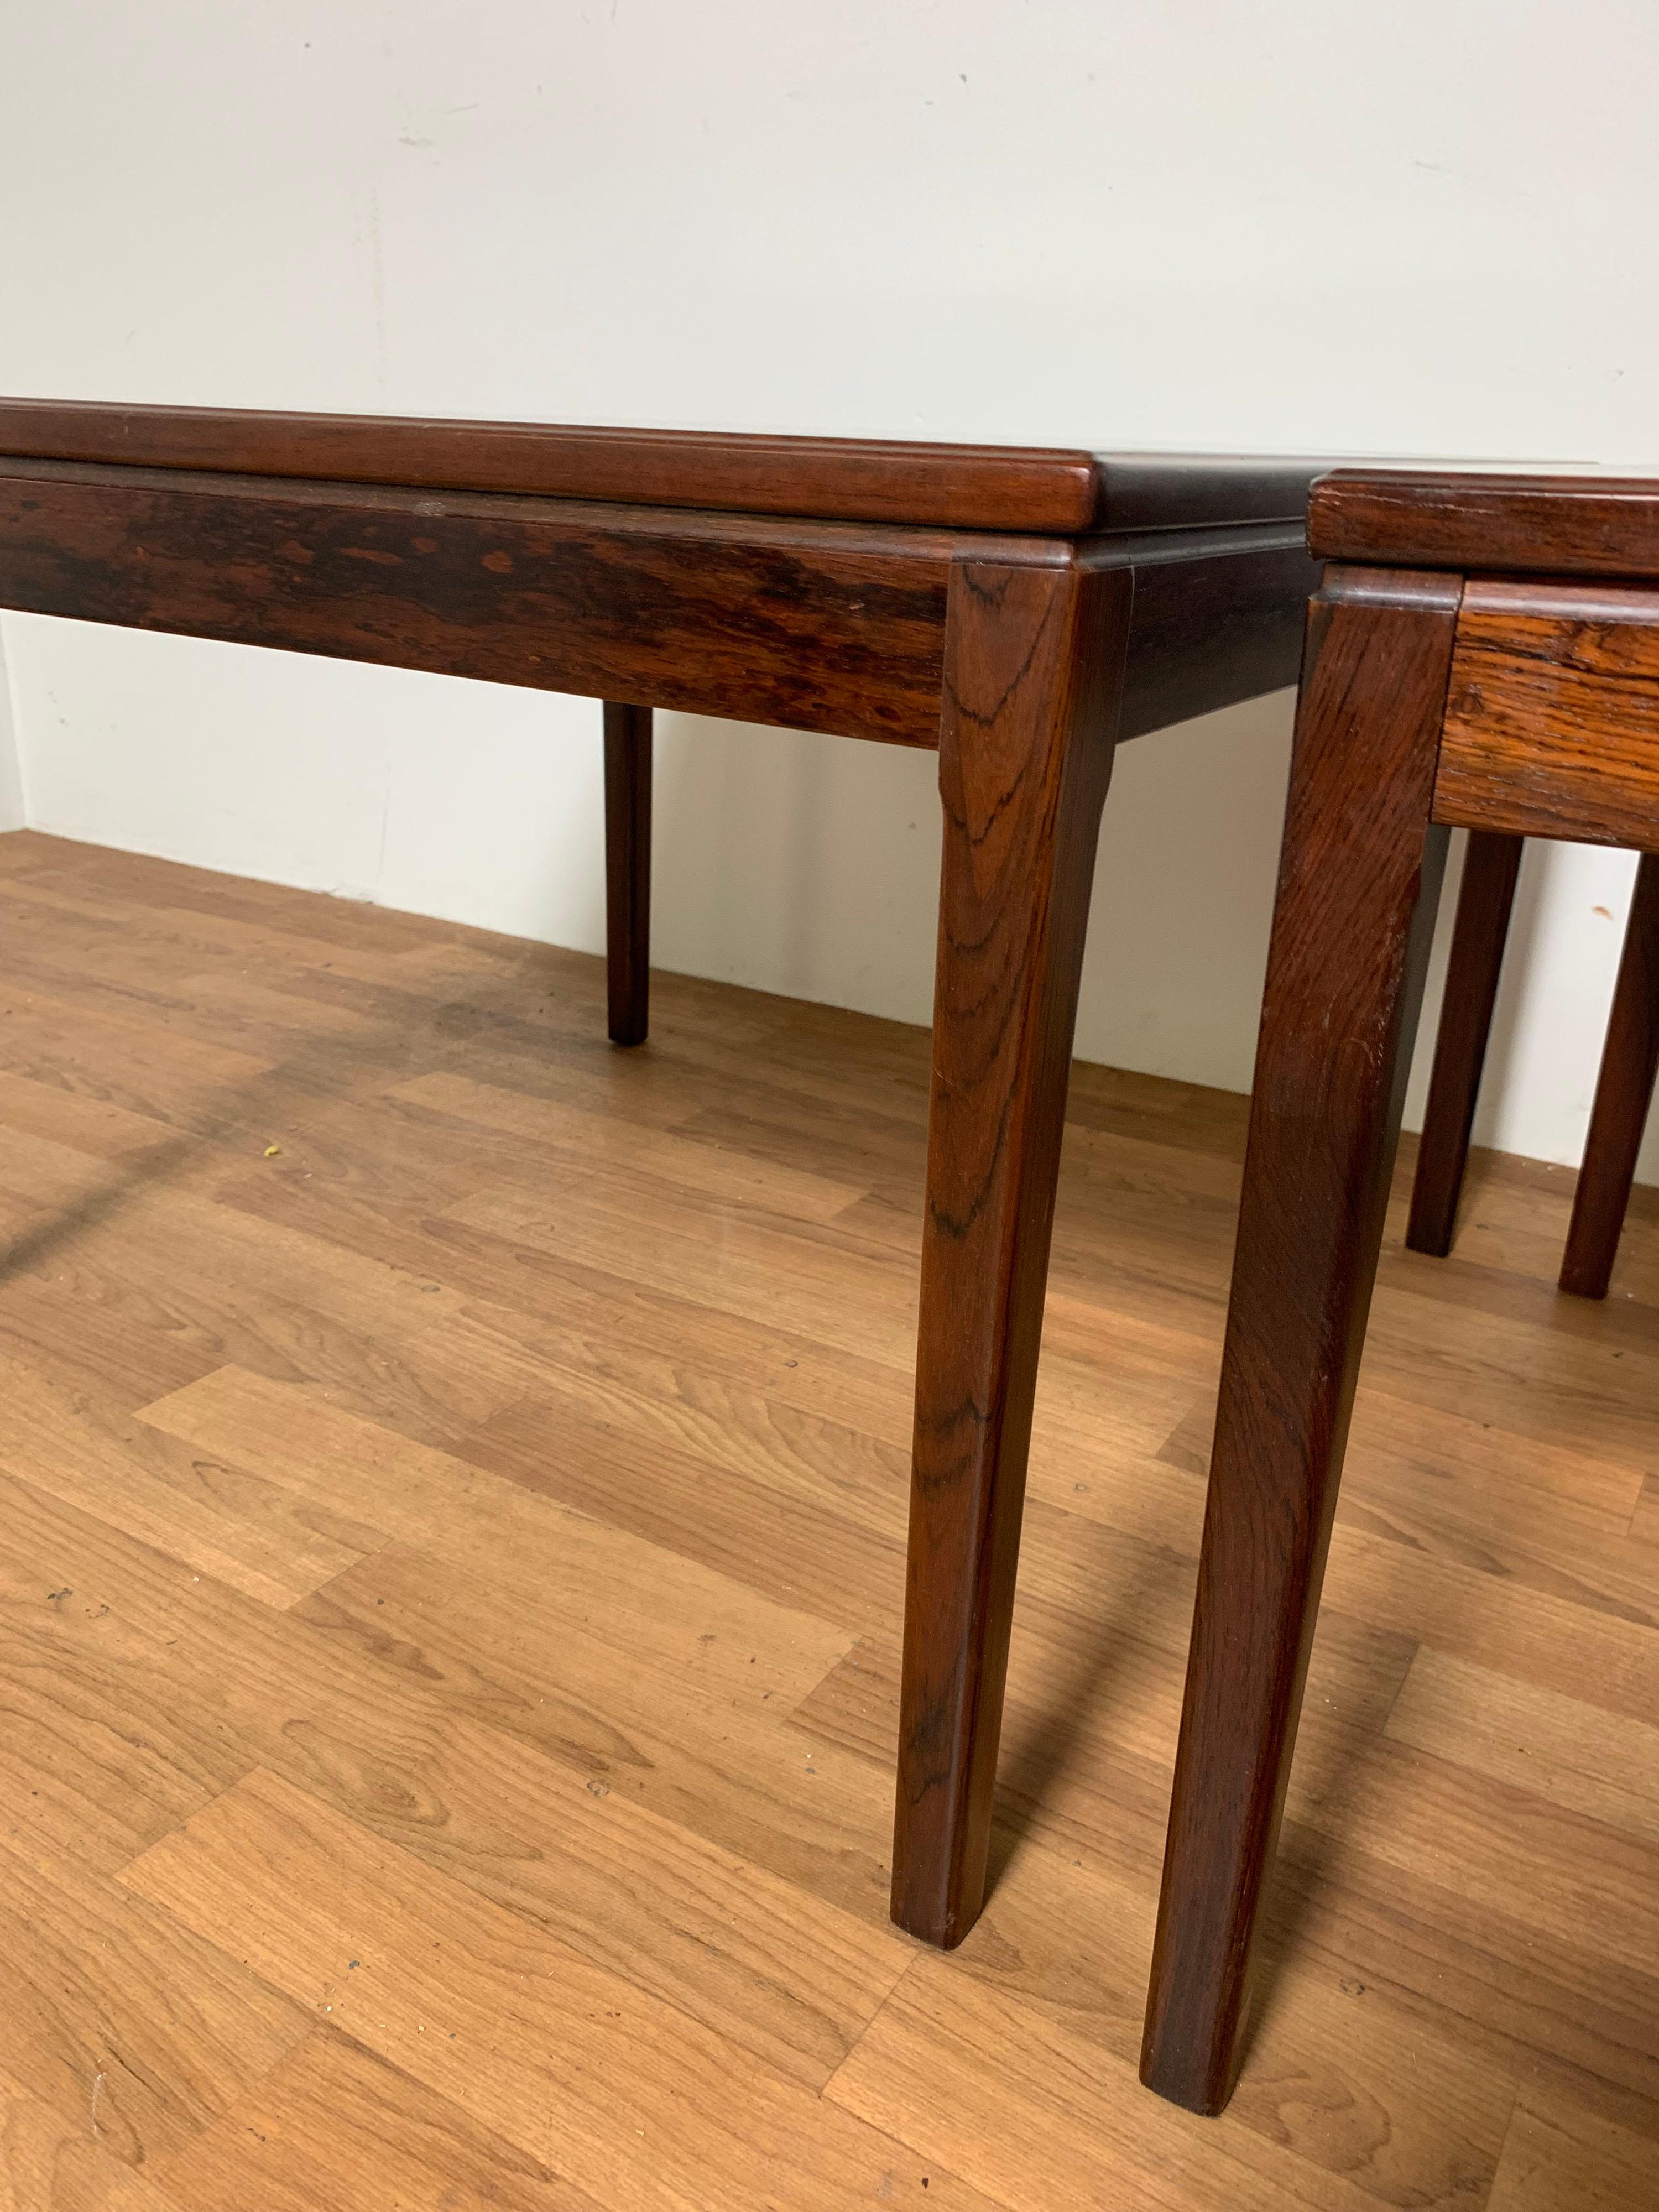 Pair of Rosewood Side Tables, Made in Norway, Circa 1970s In Good Condition For Sale In Peabody, MA